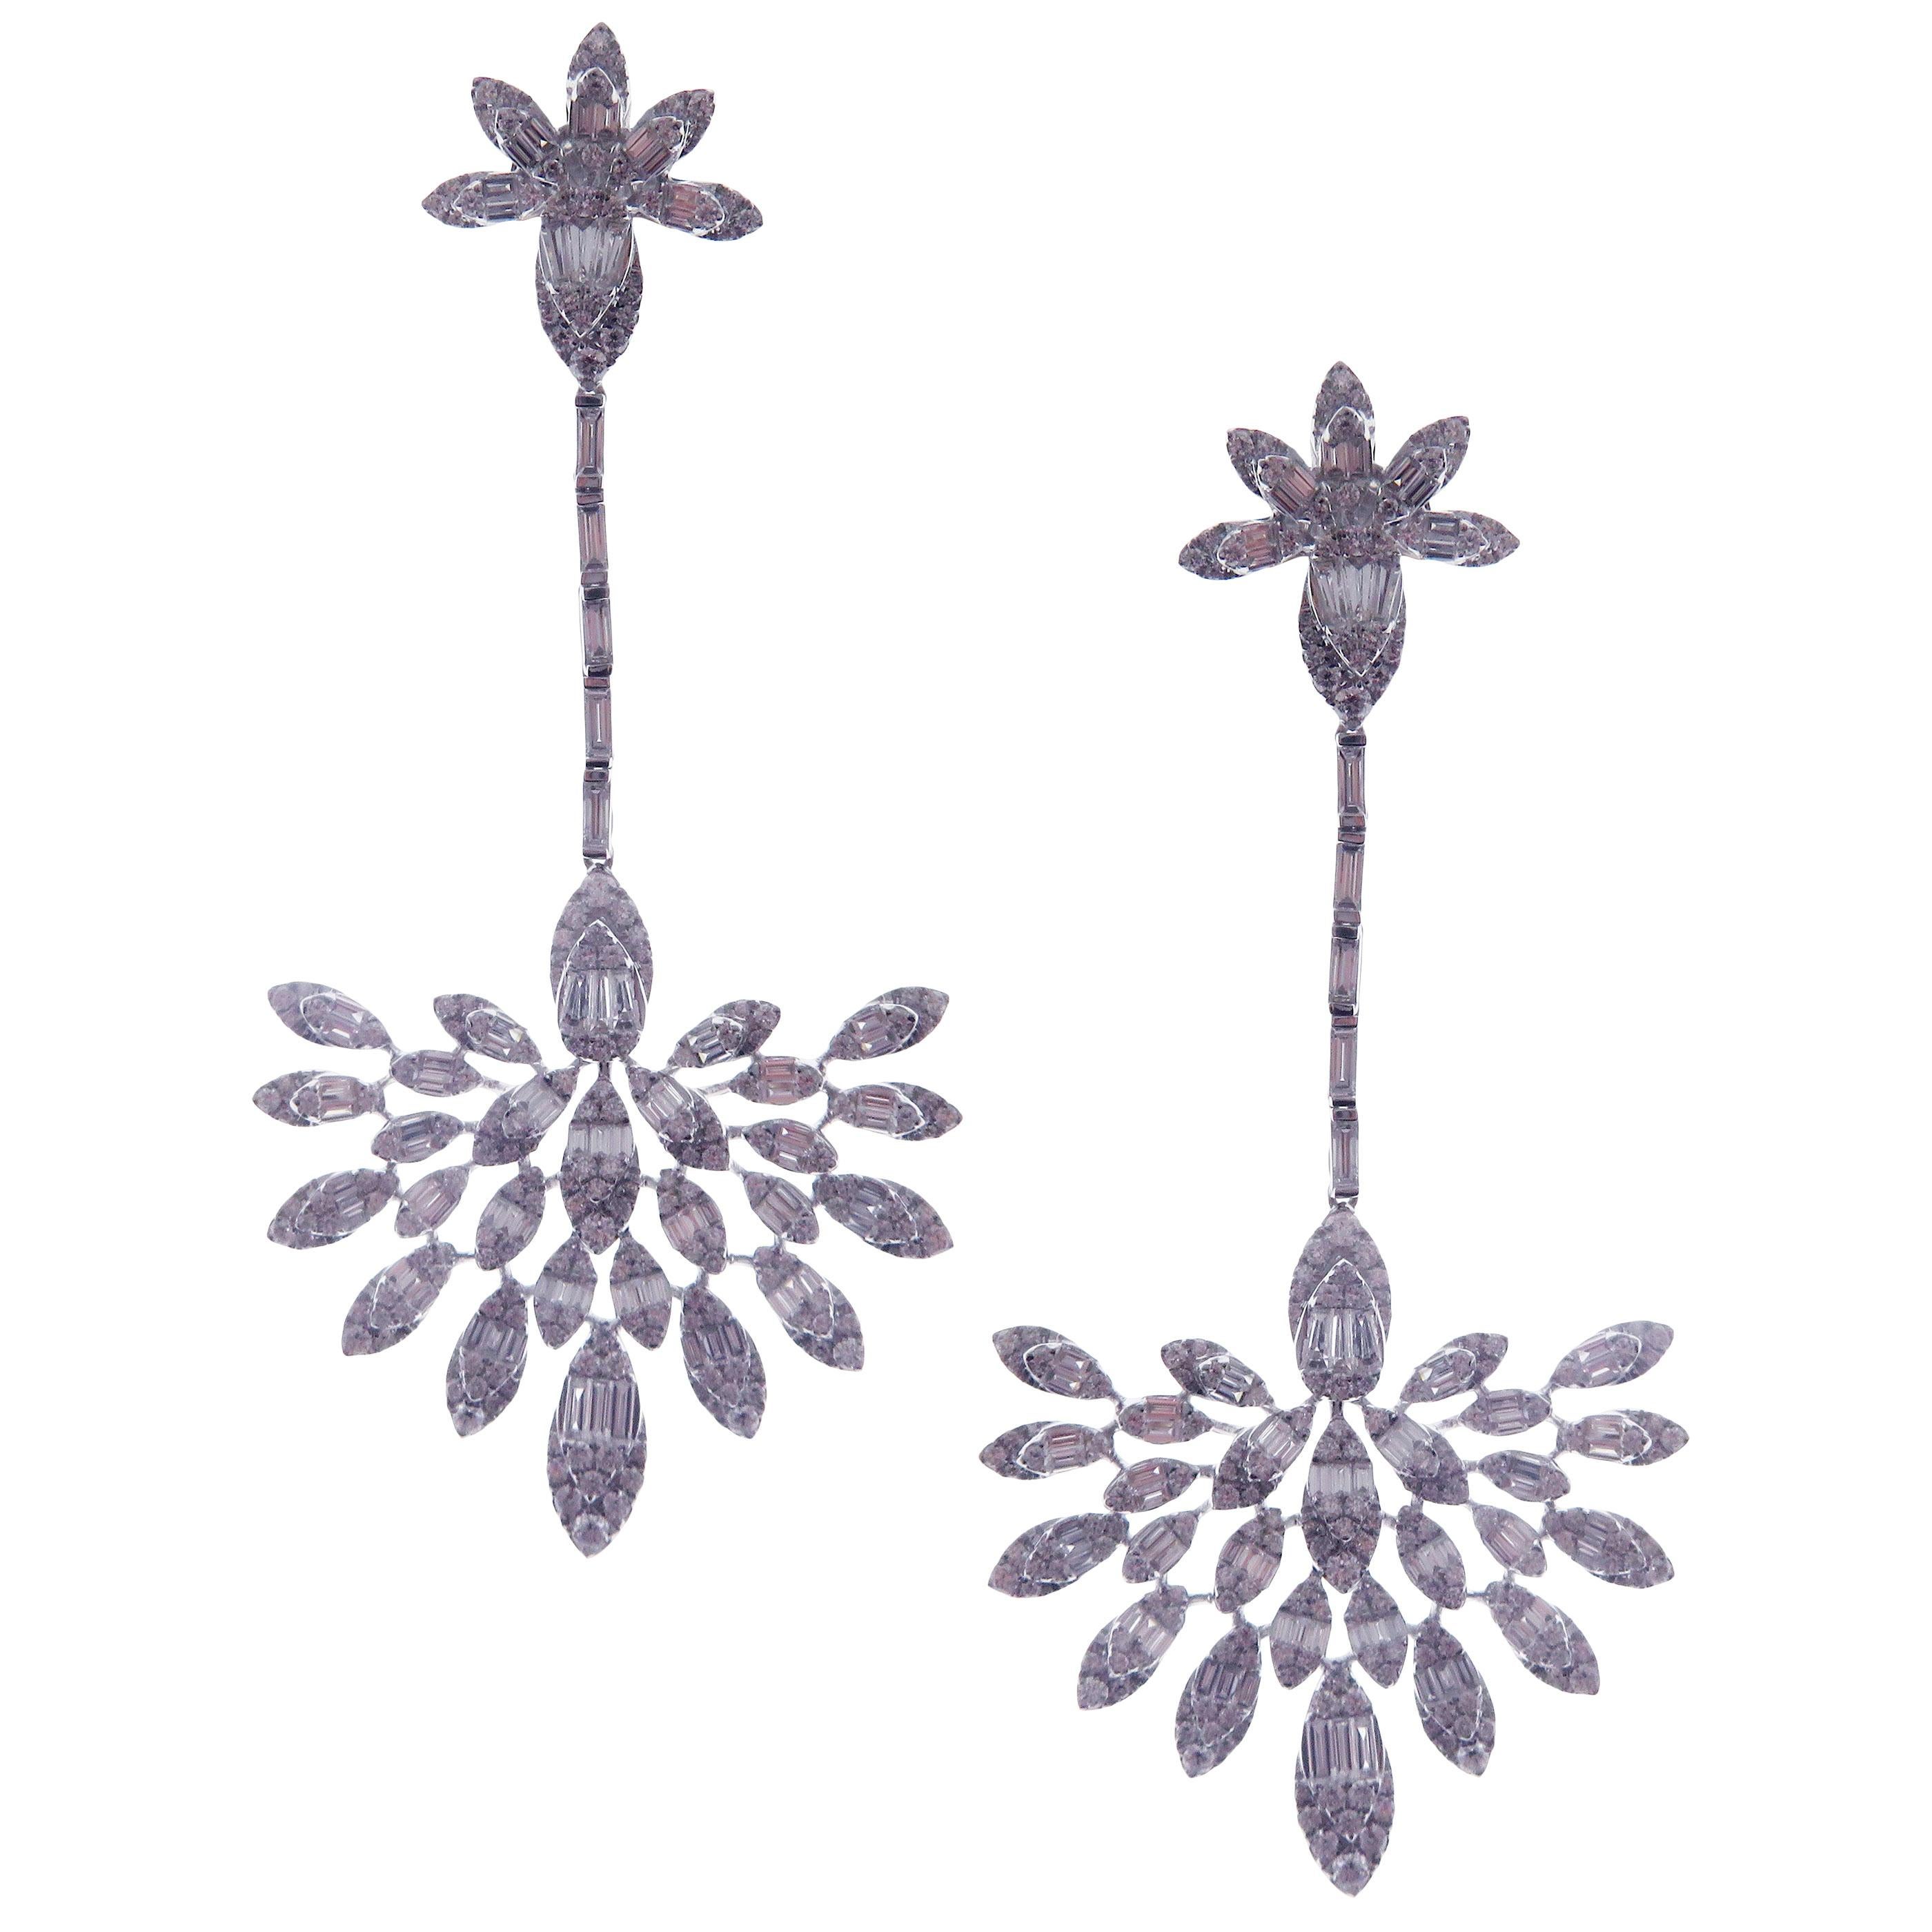 These symmetrical fan-shape dangling diamond earrings are crafted in 18-karat white gold, featuring 394 round white diamonds totaling of 3.32 carats and 170 baguette white diamonds totaling of 3.36 carats.
Approximate total weight 28.29 grams.
These